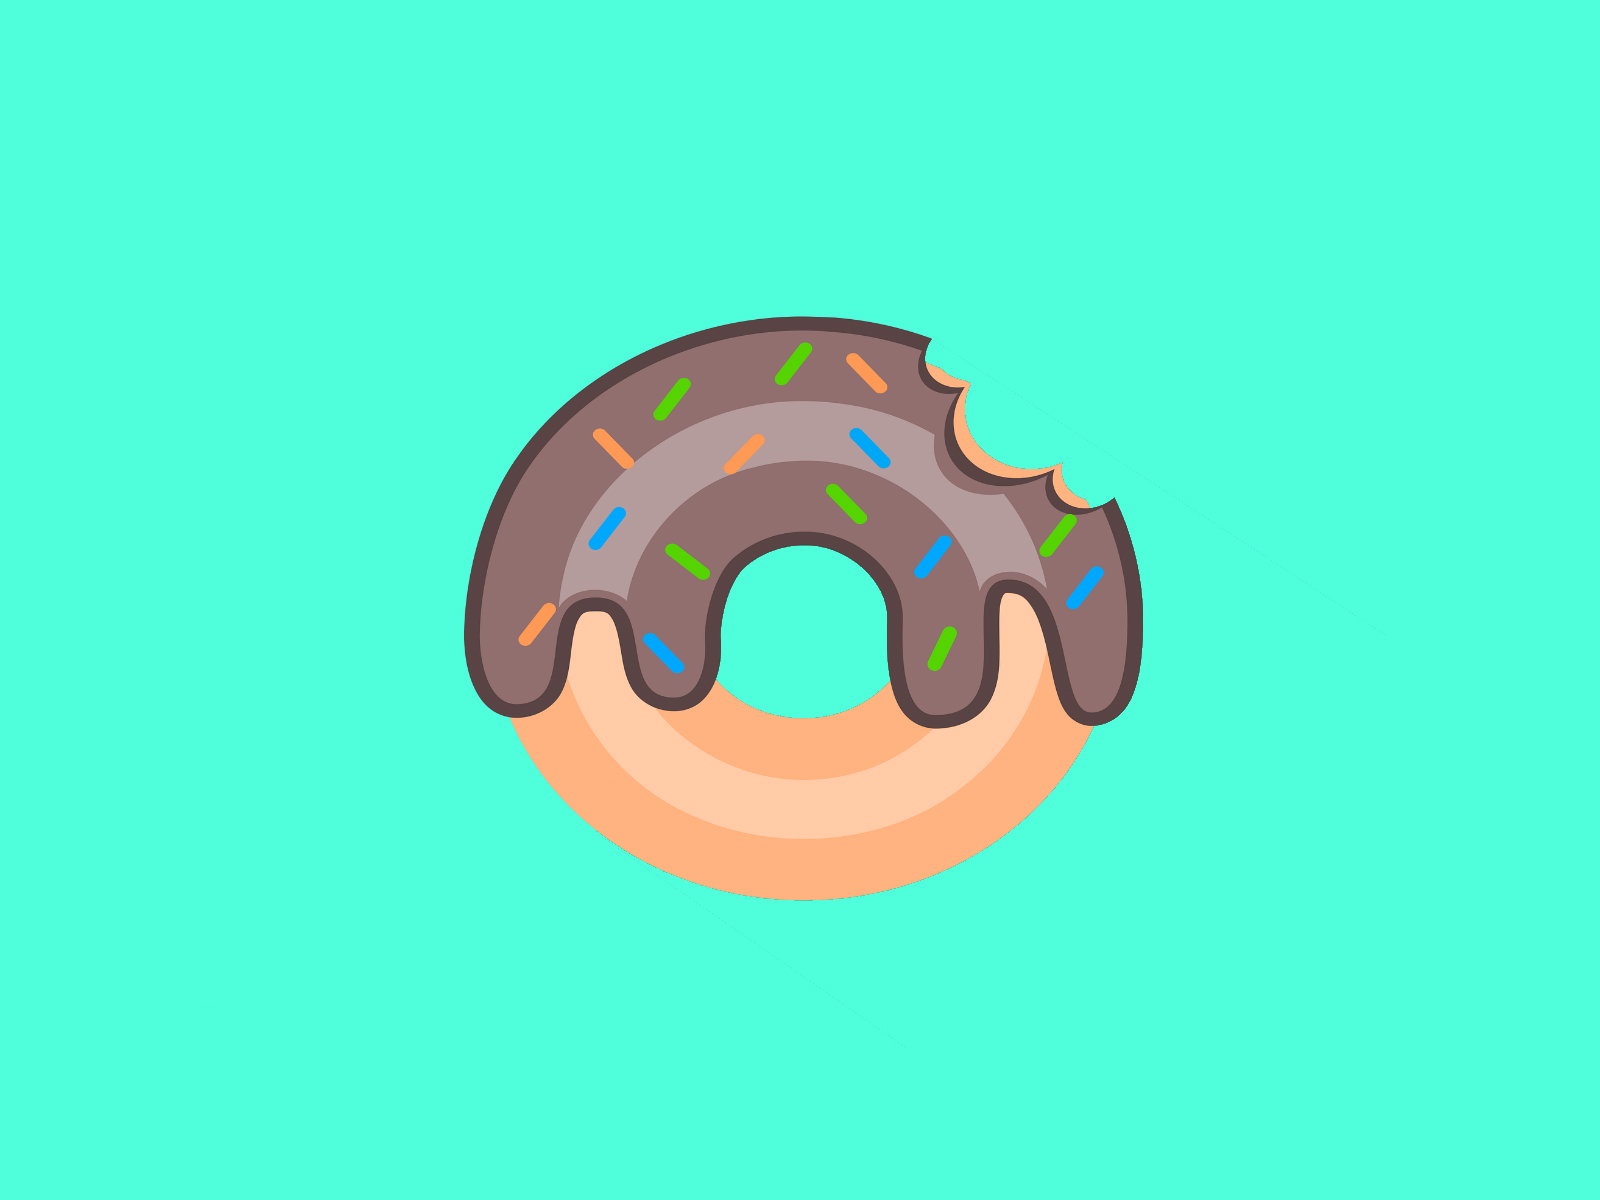 This is a donut